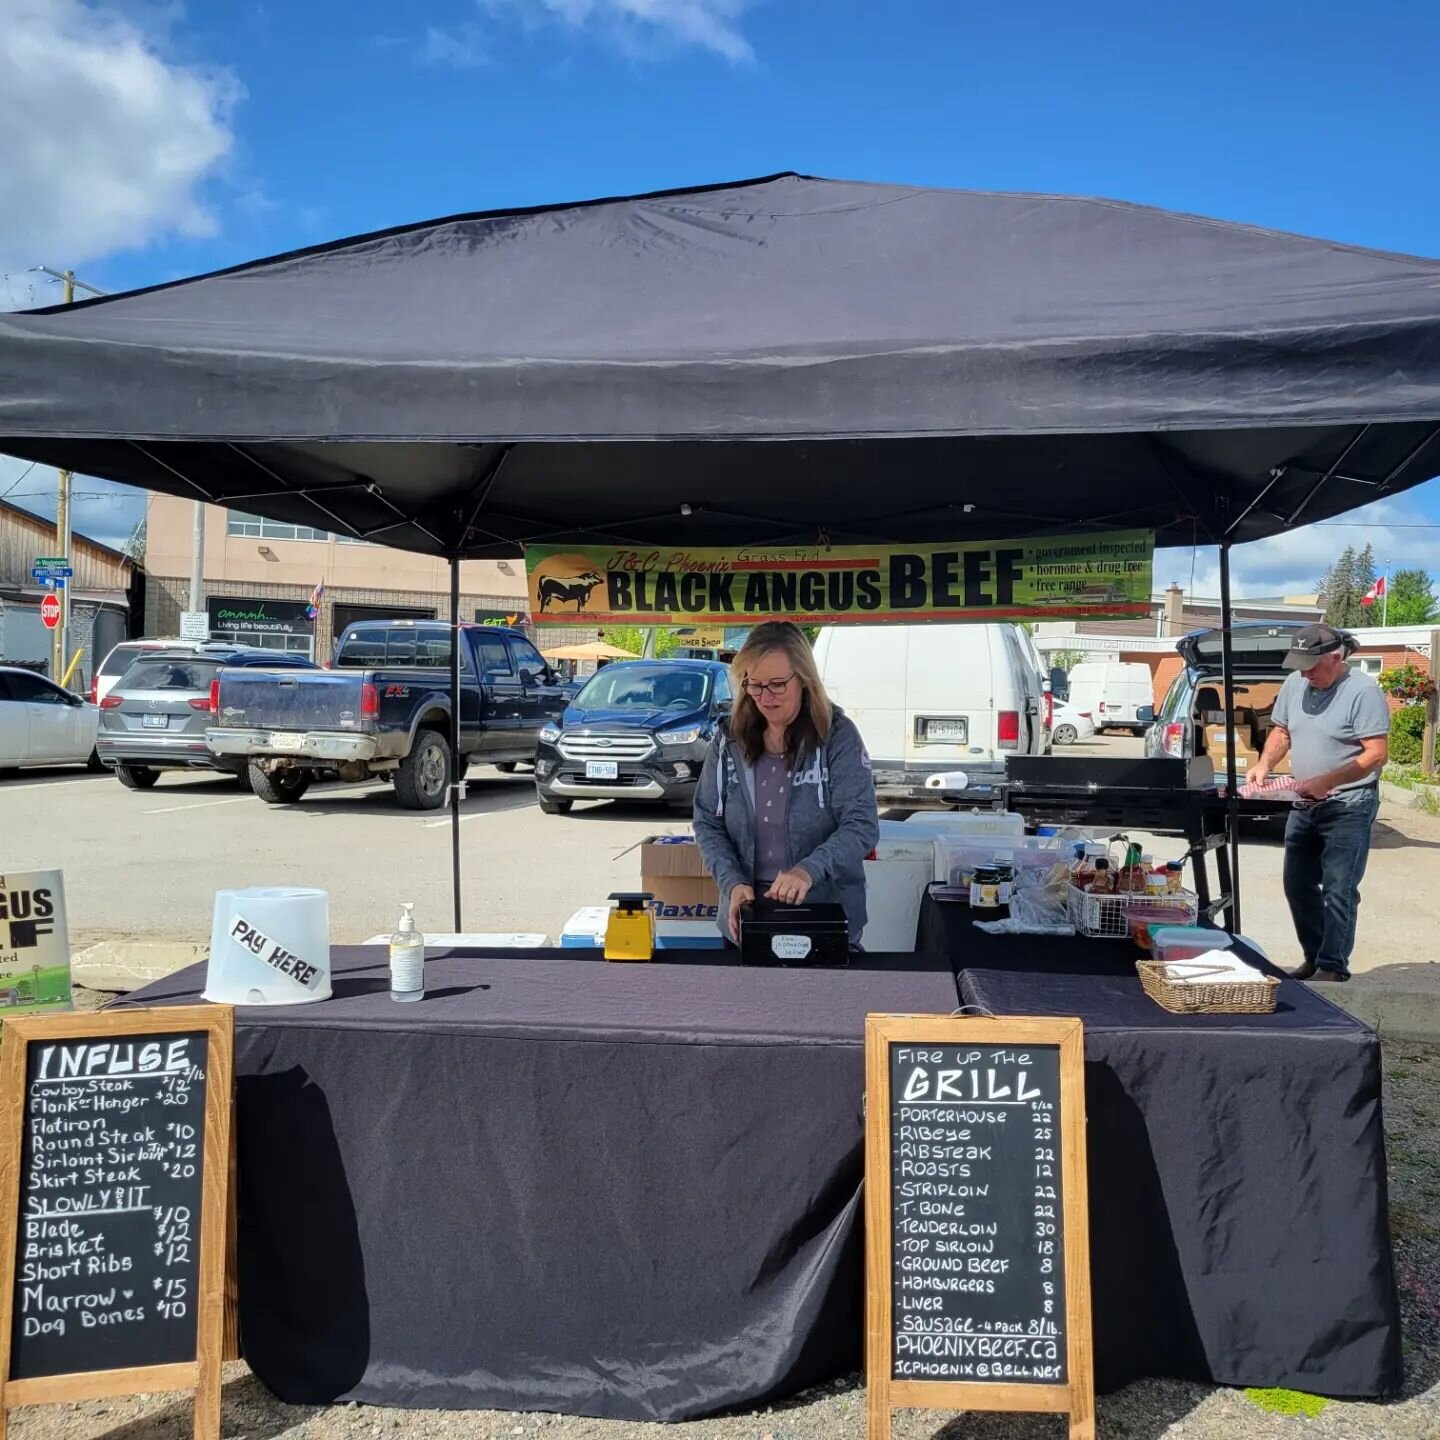 Humanely raised, grass fed beef is back at the Minden Farmers' Market today from 10-2 in downtown Minden!! Come say hi and get a fresh and hot bbq'd burger while you're at it!
.
.
.
#grassfedbeef #blackangusbeef #bbq #burgers #hormoneandantibioticfre